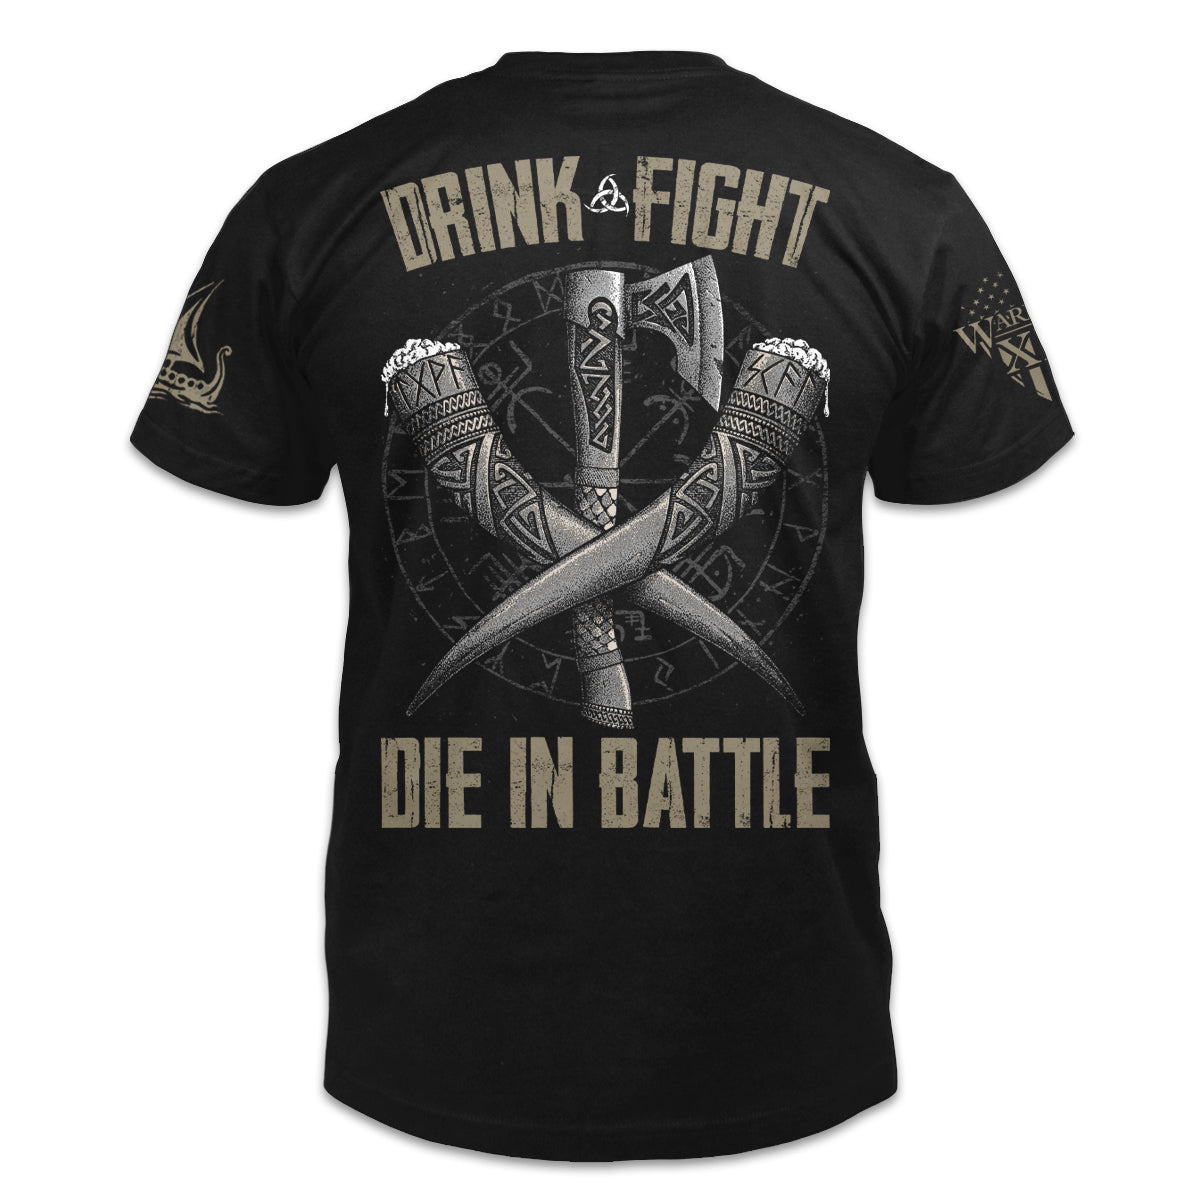 A black t-shirt with the words "Drink, fight, die in battle." with mediaeval printed tusks on the back of the shirt.